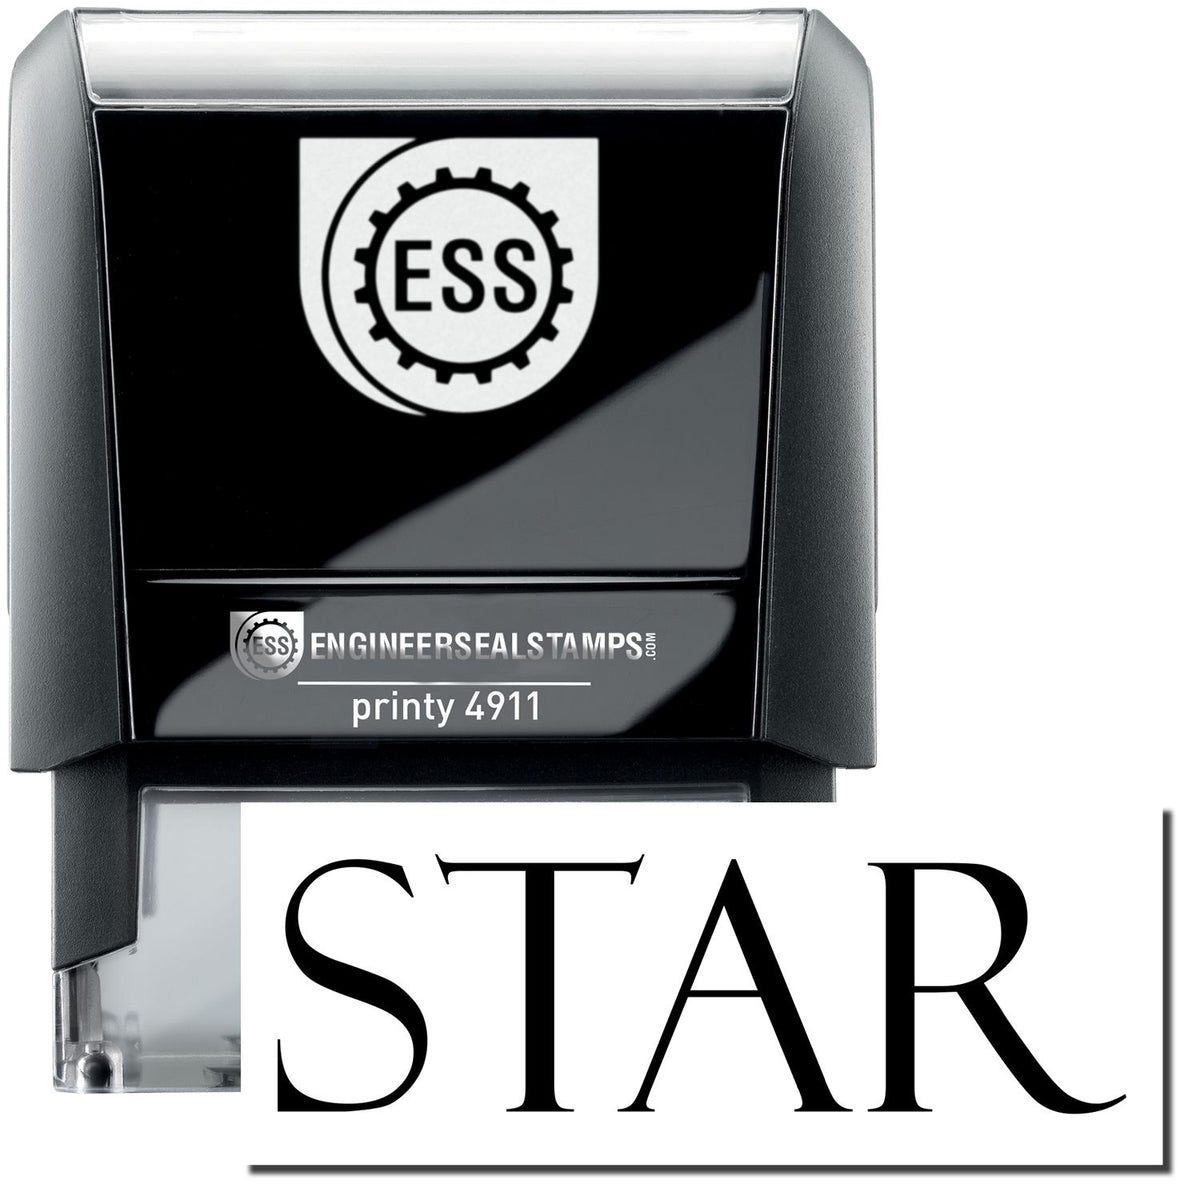 A self-inking stamp with a stamped image showing how the text &quot;STAR&quot; is displayed after stamping.